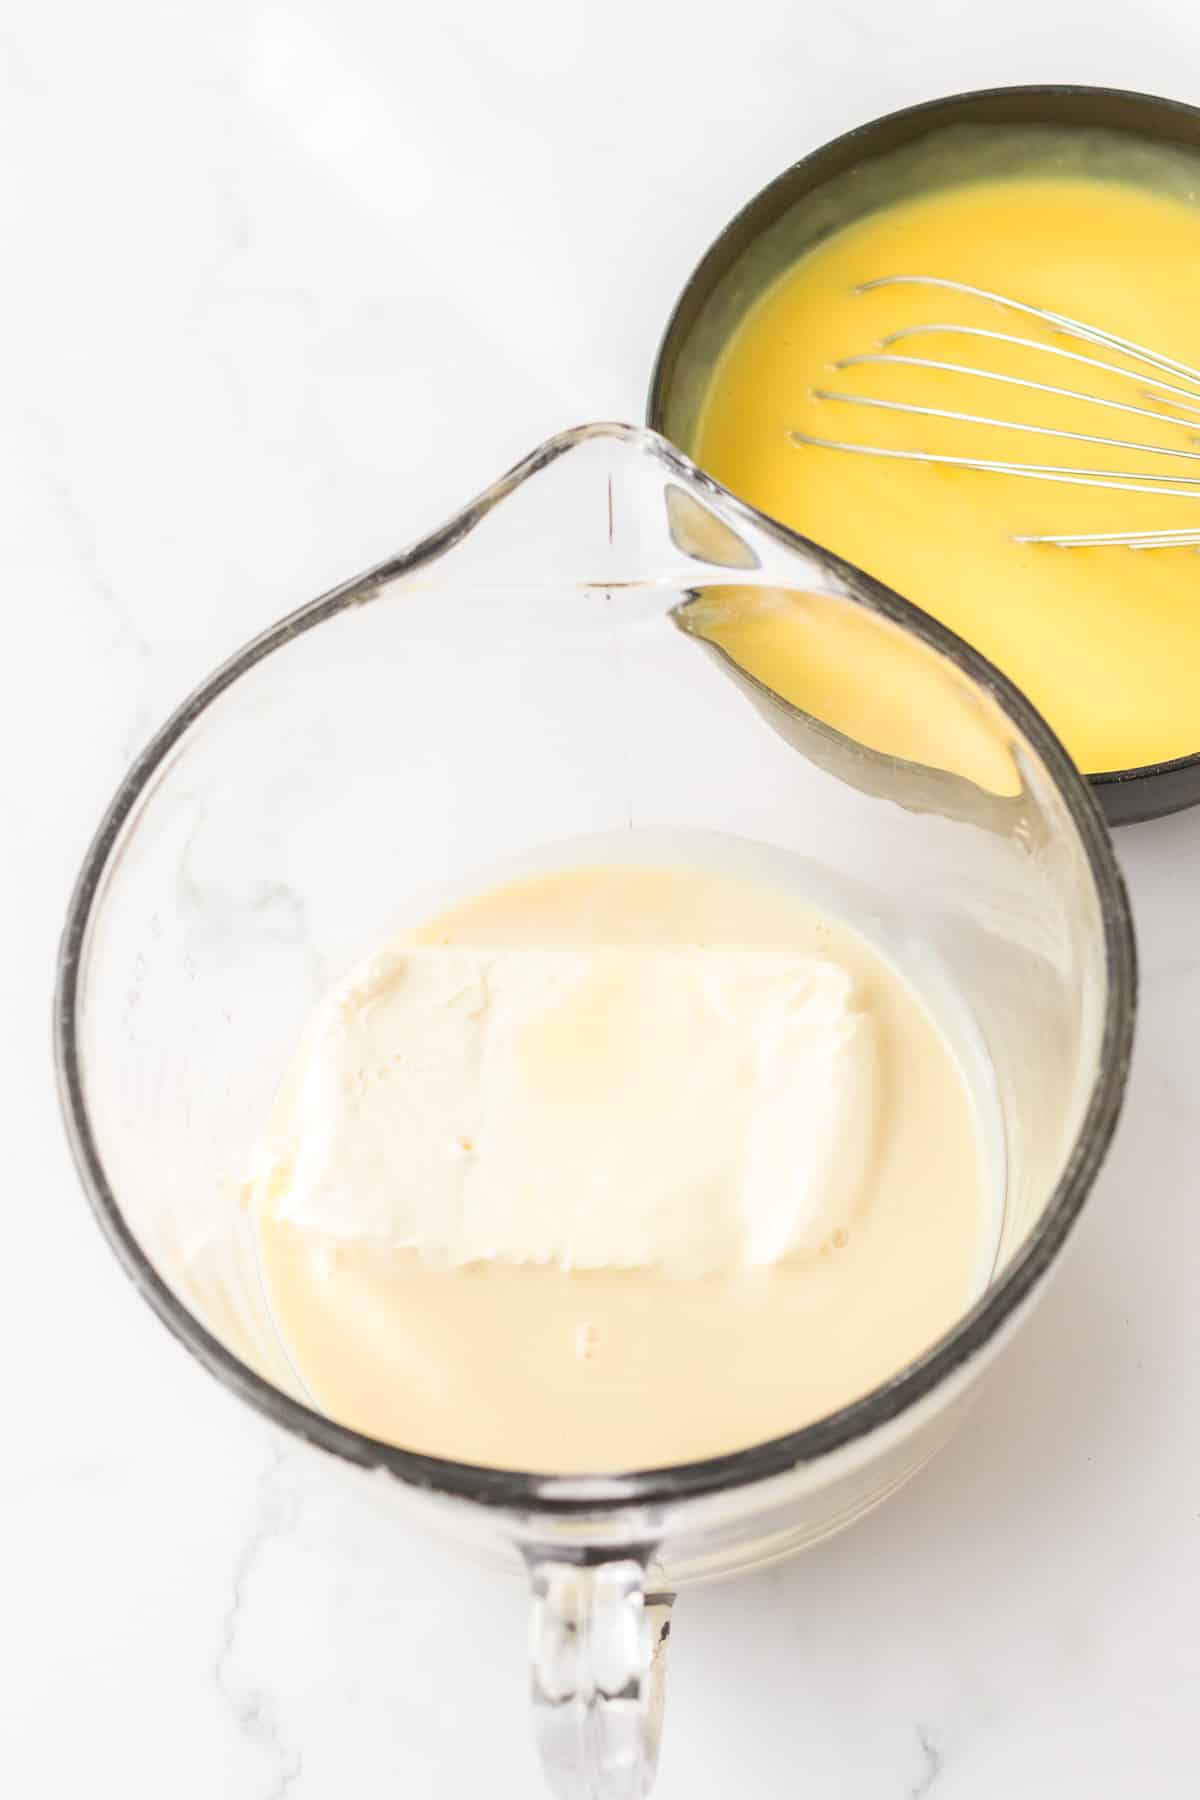 Cream cheese and sweetened condensed milk being mixed in a large bowl from overhead with banana pudding being mixed with a whisk in a bowl nearby.